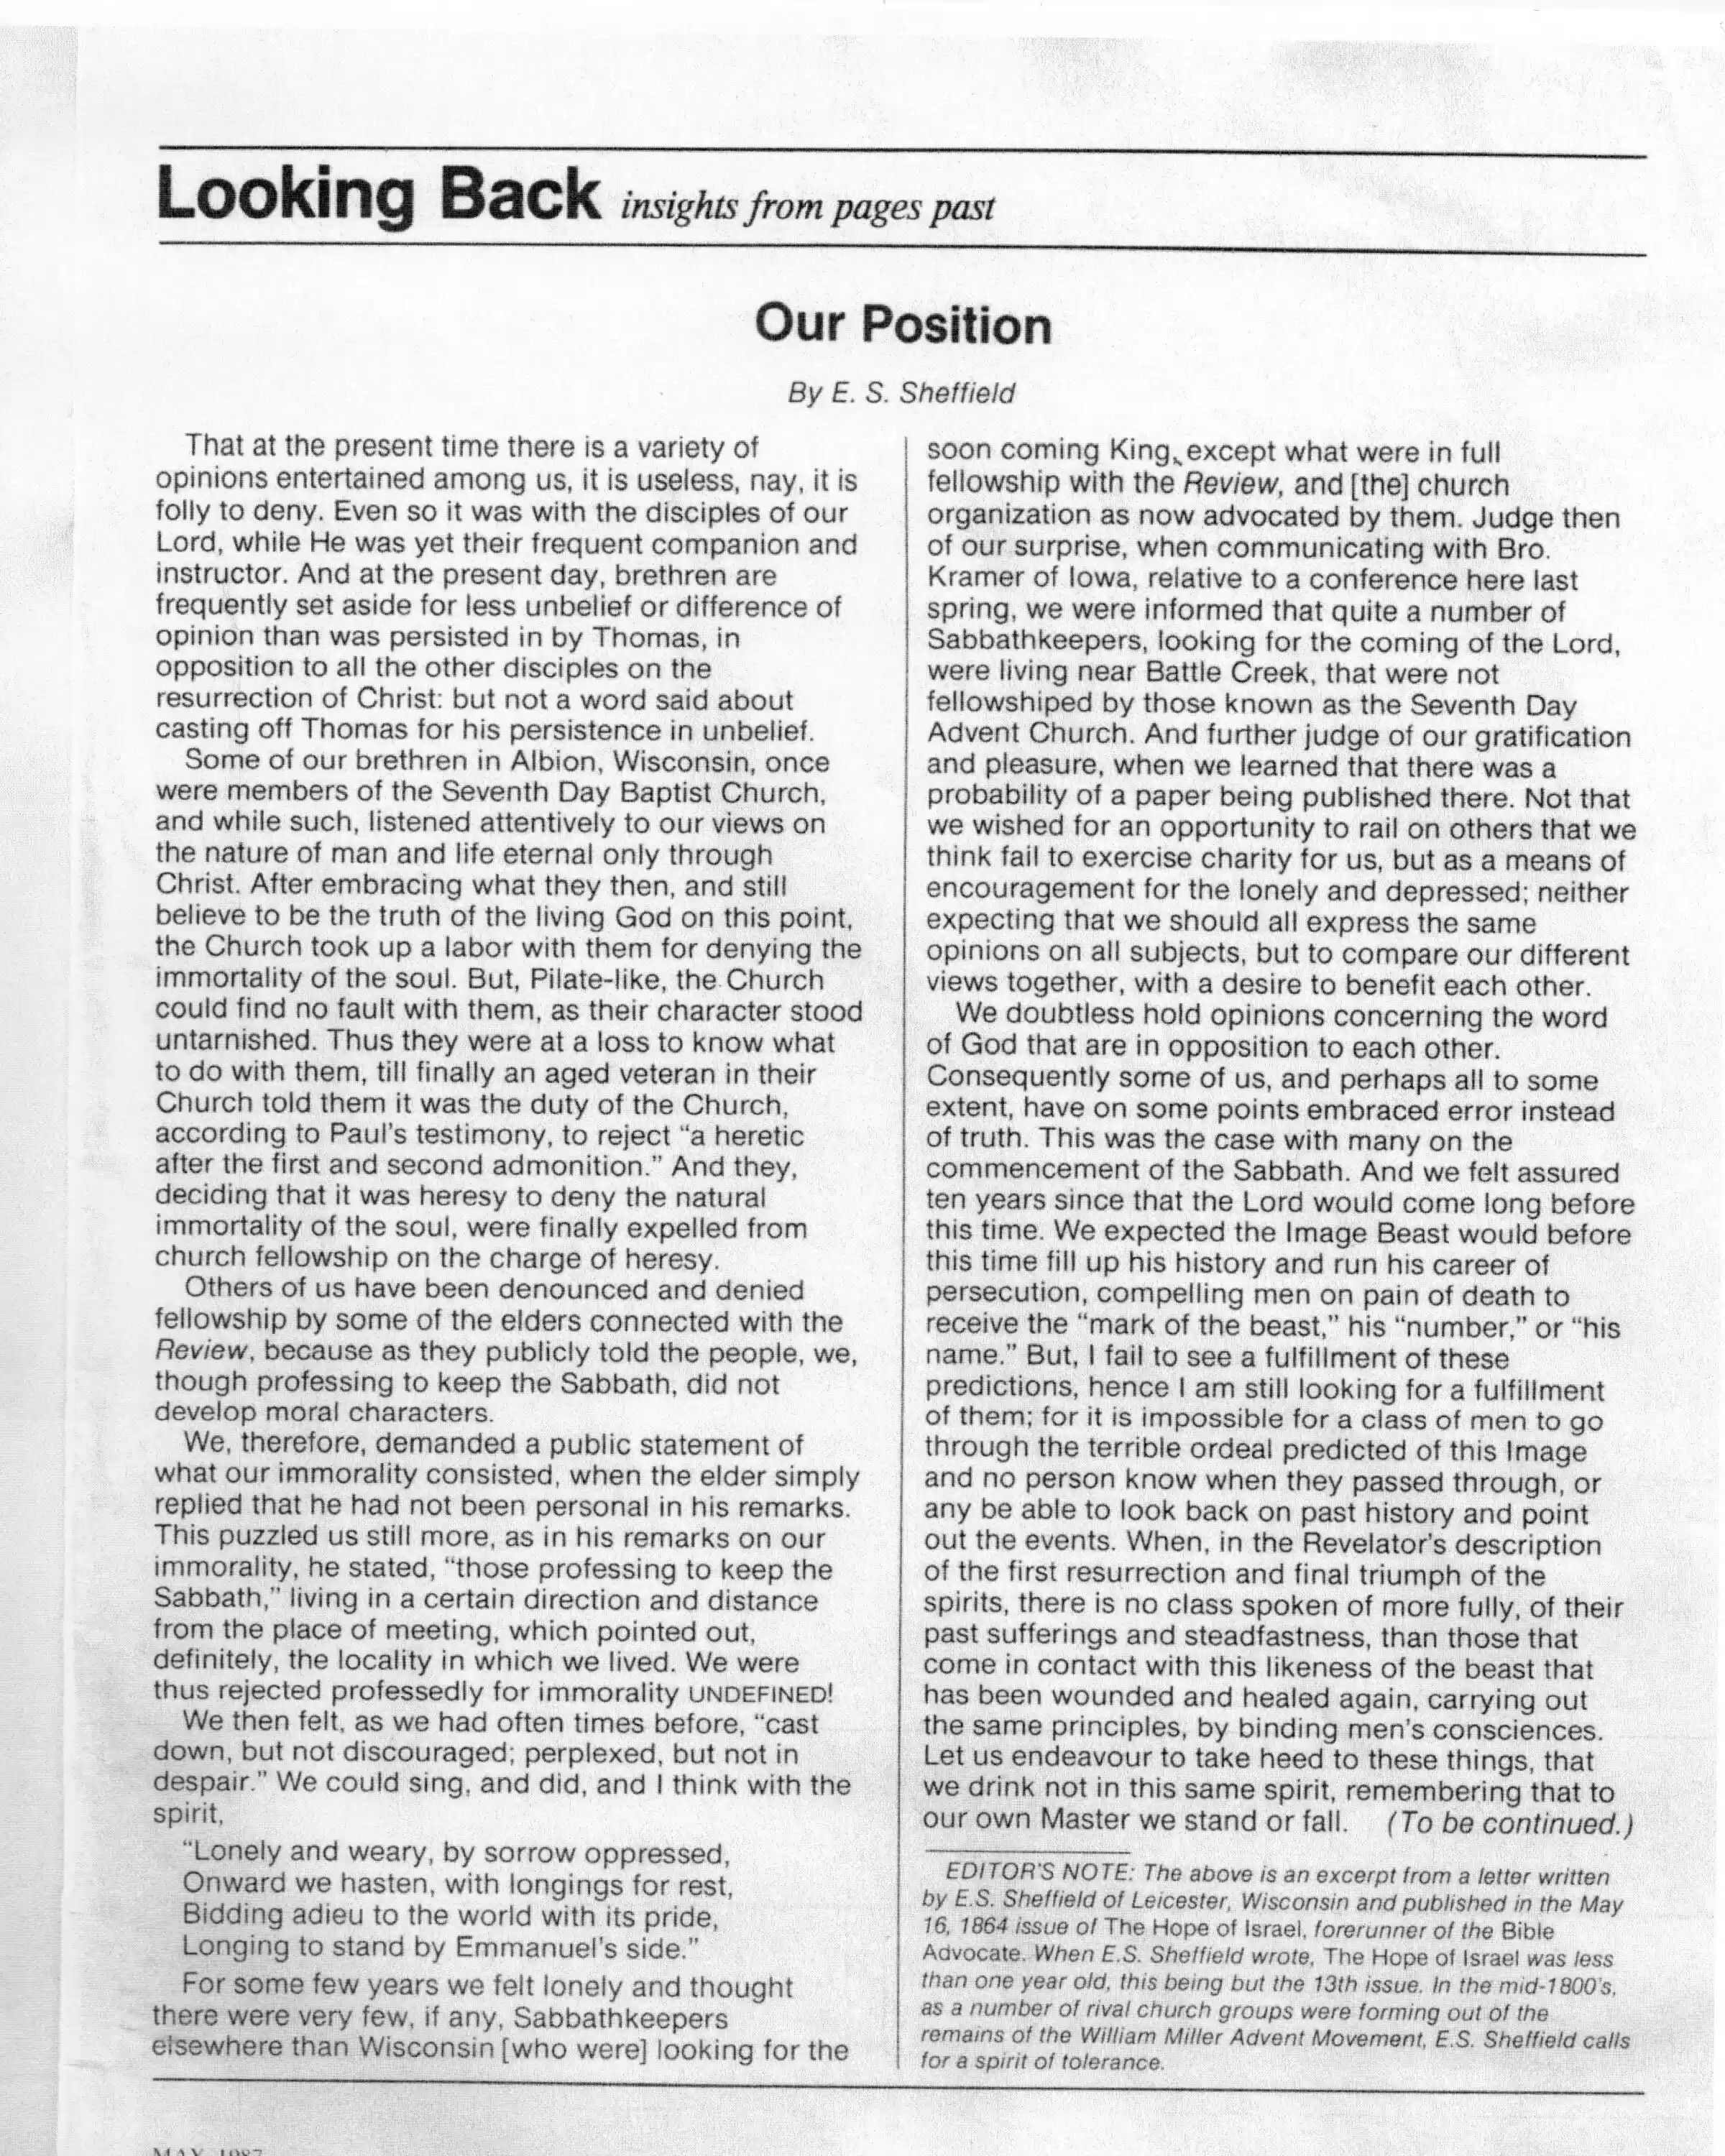 Our Position, by ES Sheffield 16 May 1864, Hope of Israel